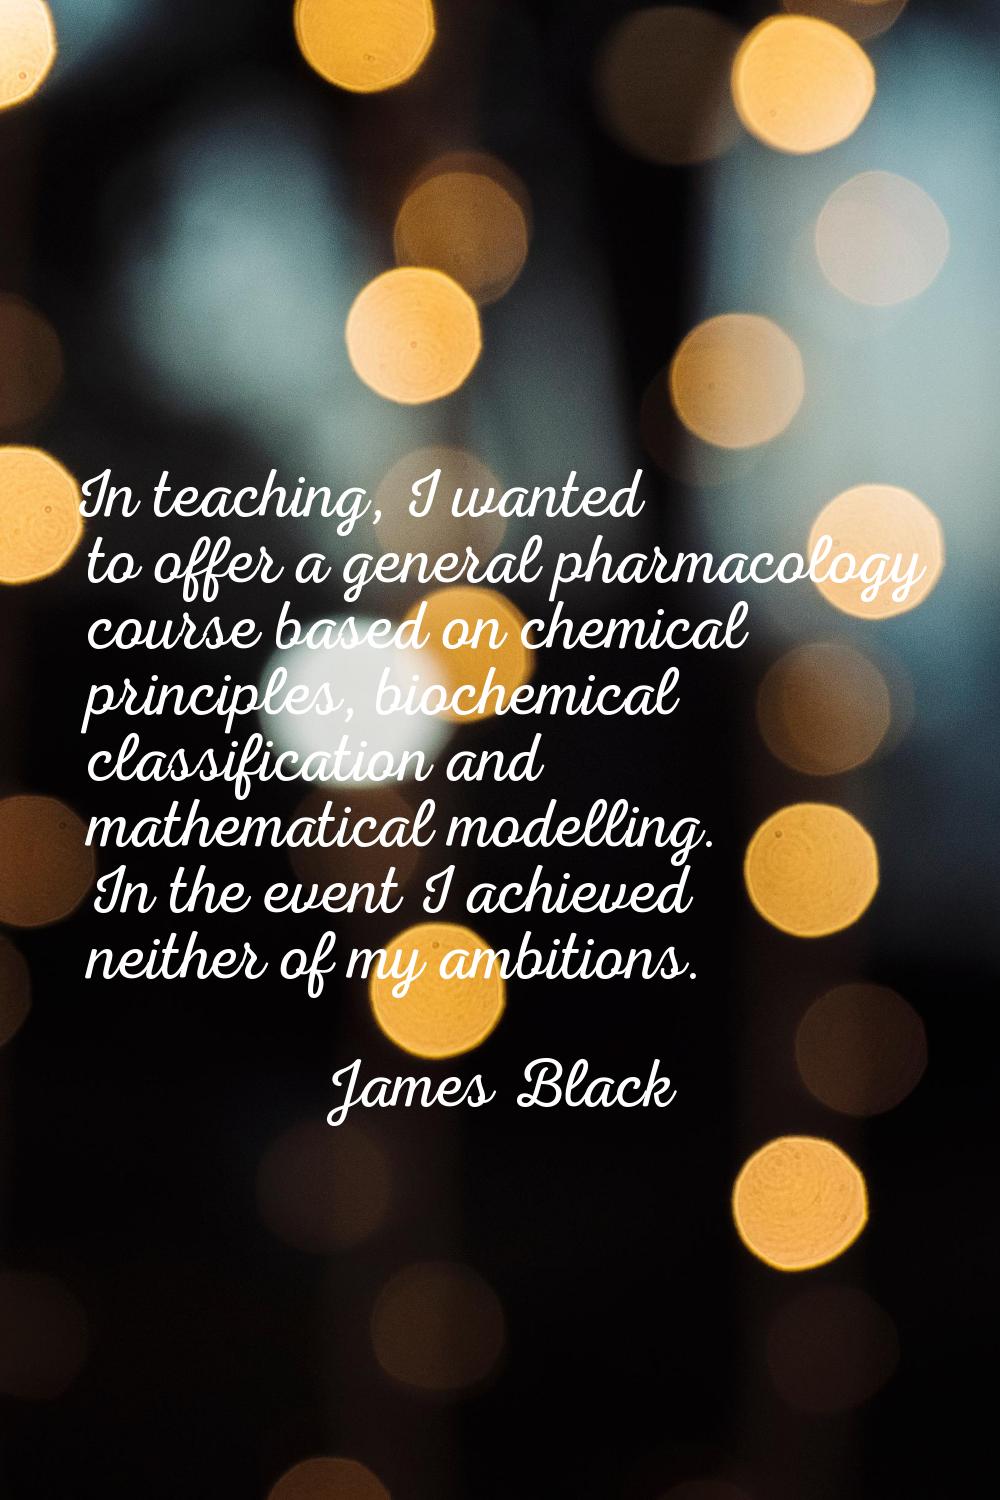 In teaching, I wanted to offer a general pharmacology course based on chemical principles, biochemi